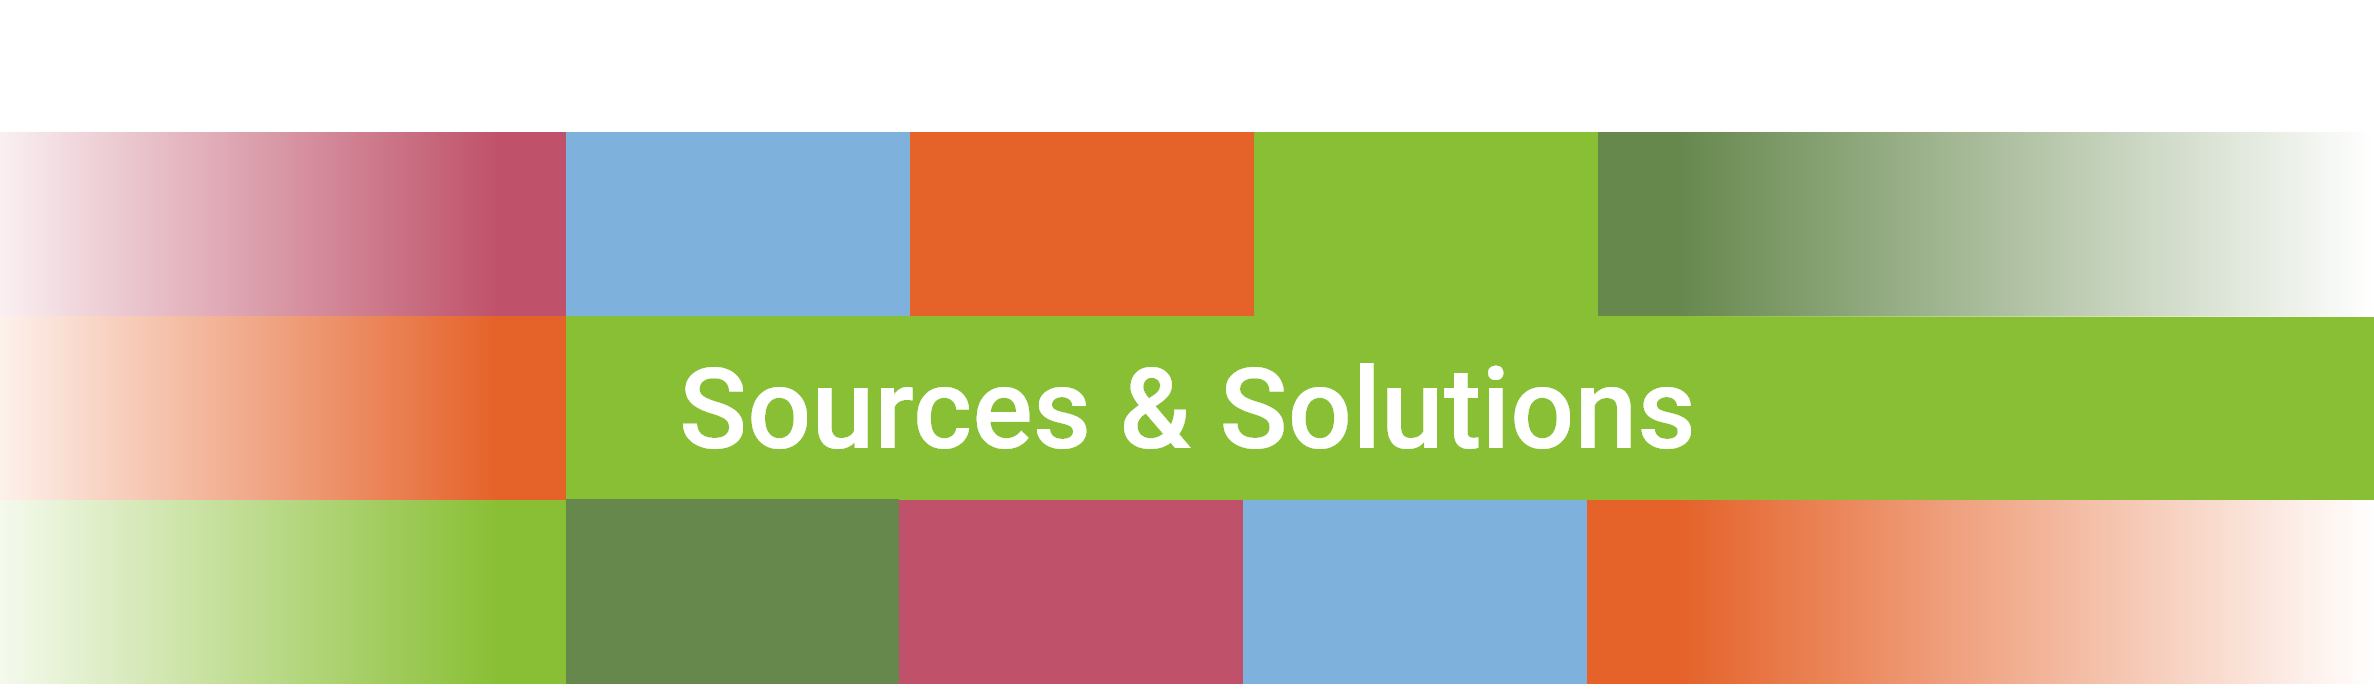 sources%26solutions